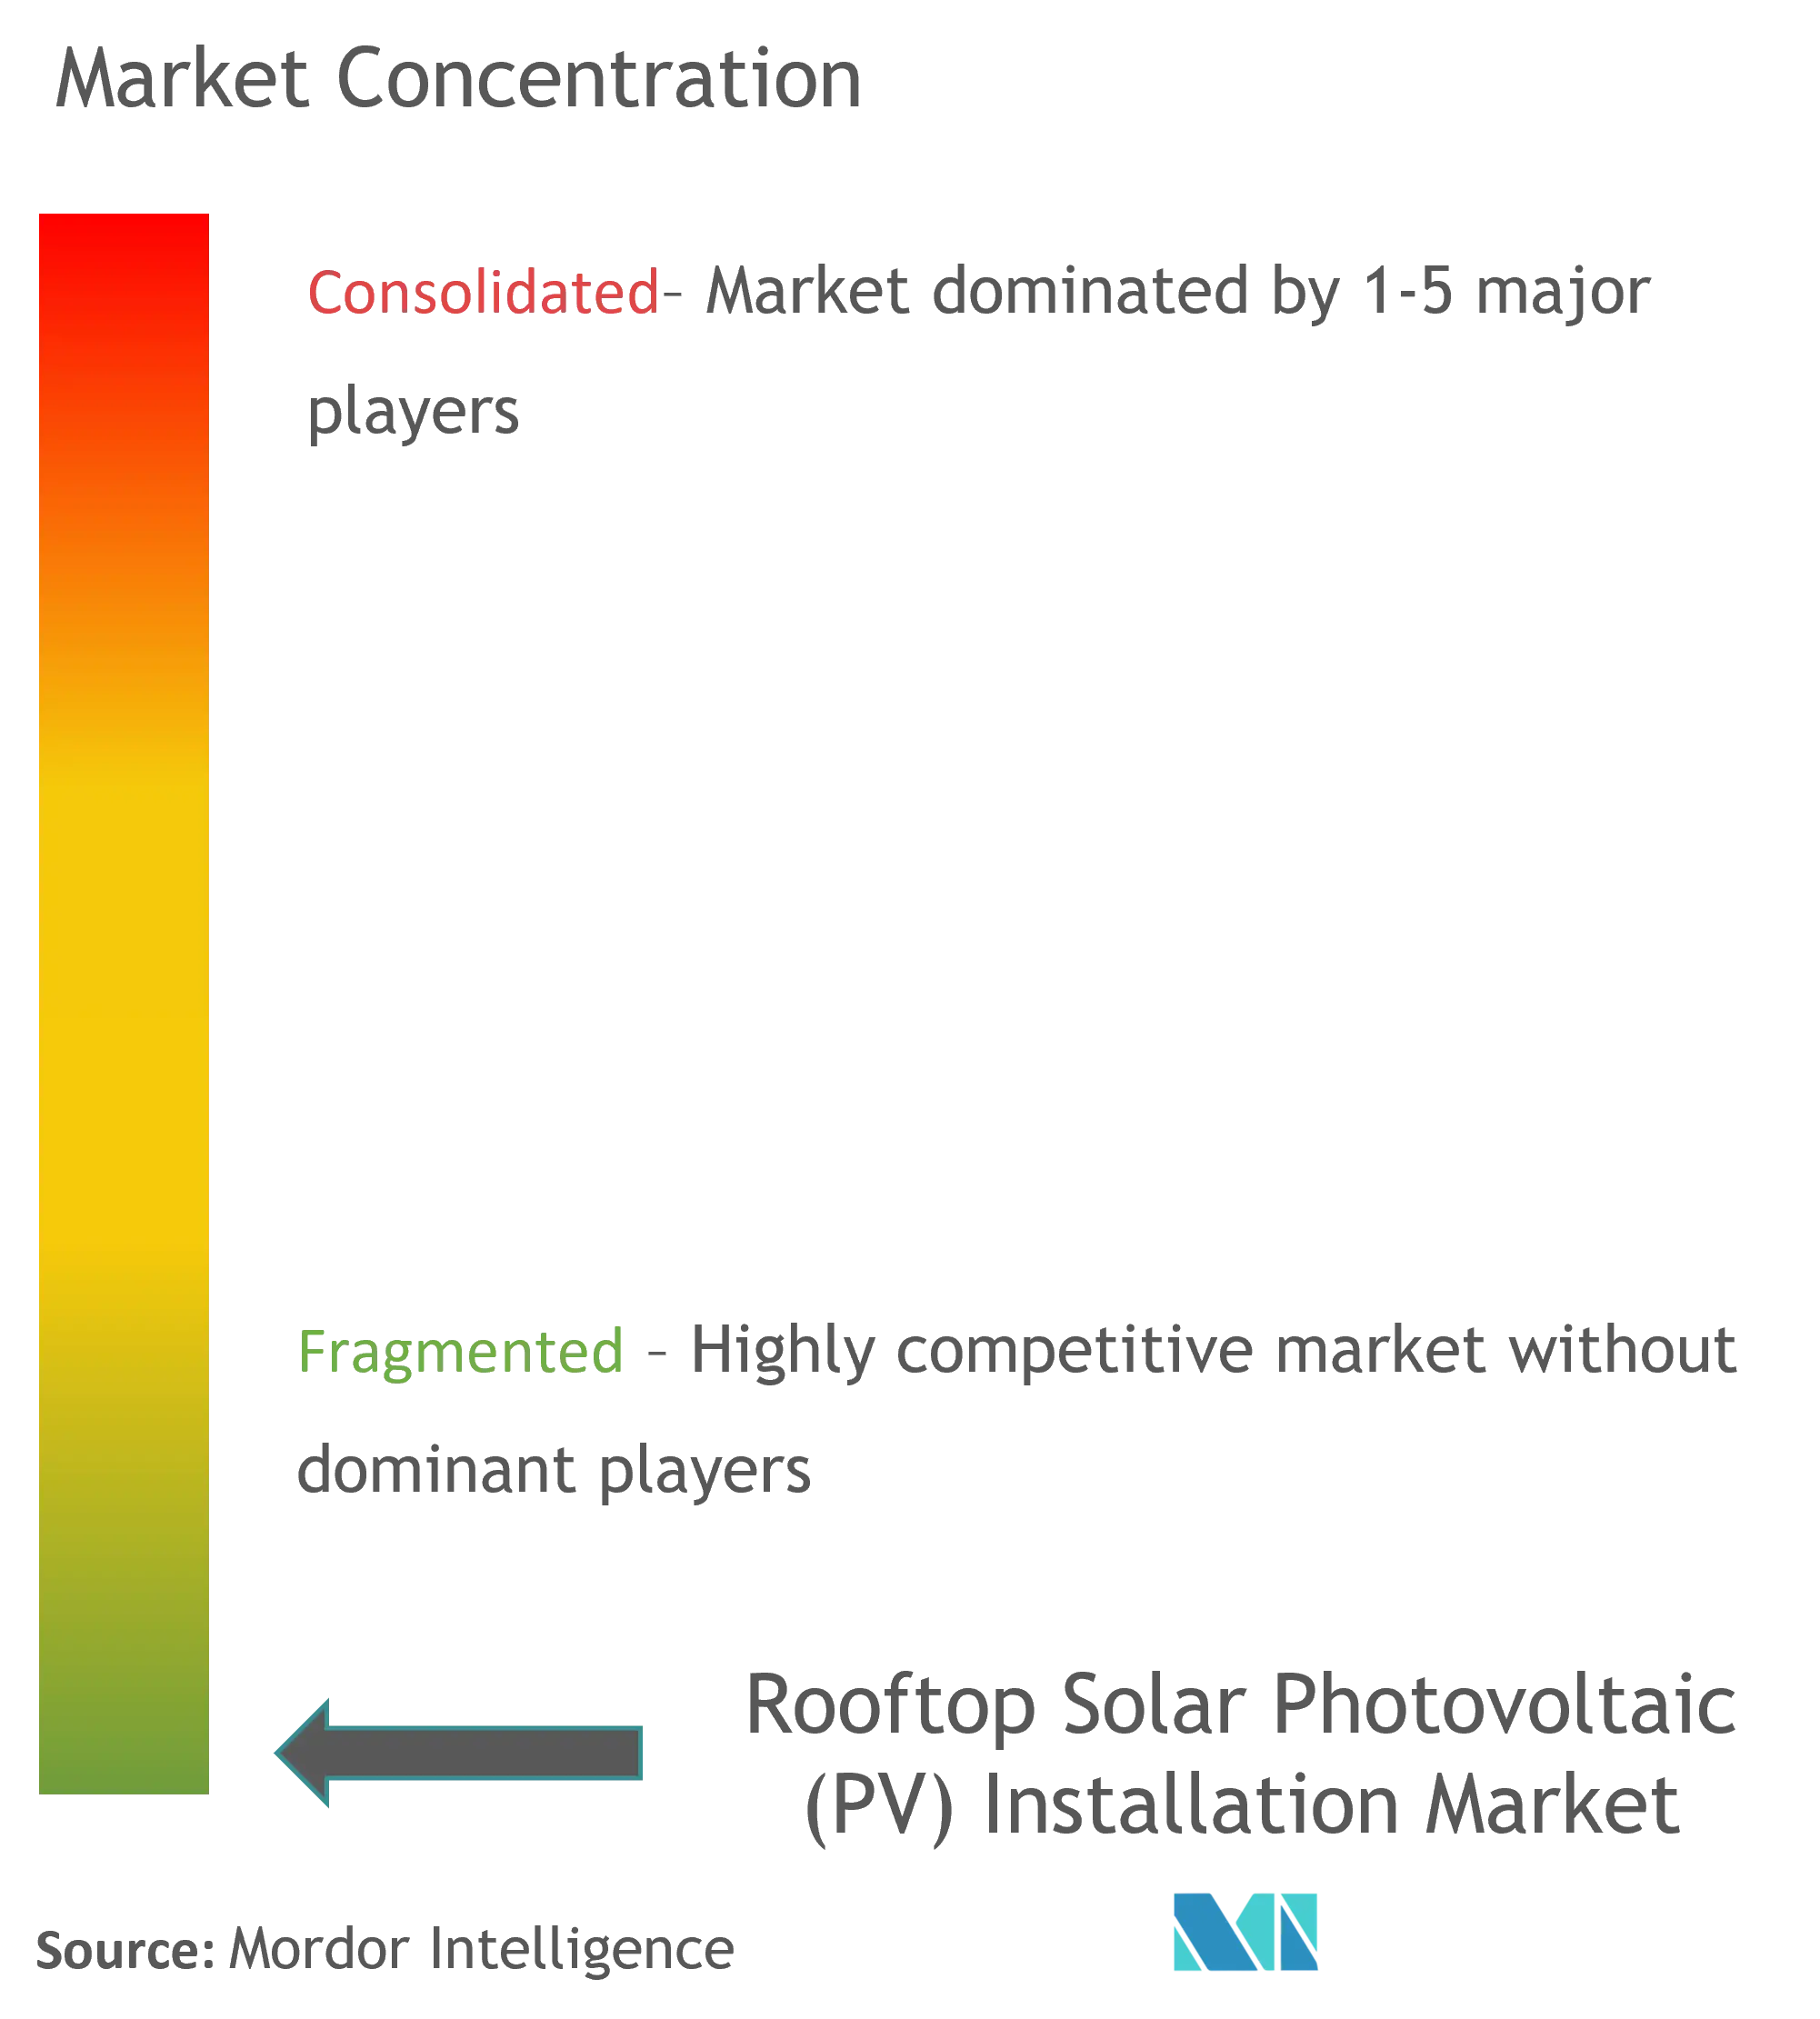 Rooftop Solar Photovoltaic Installation Market Concentration